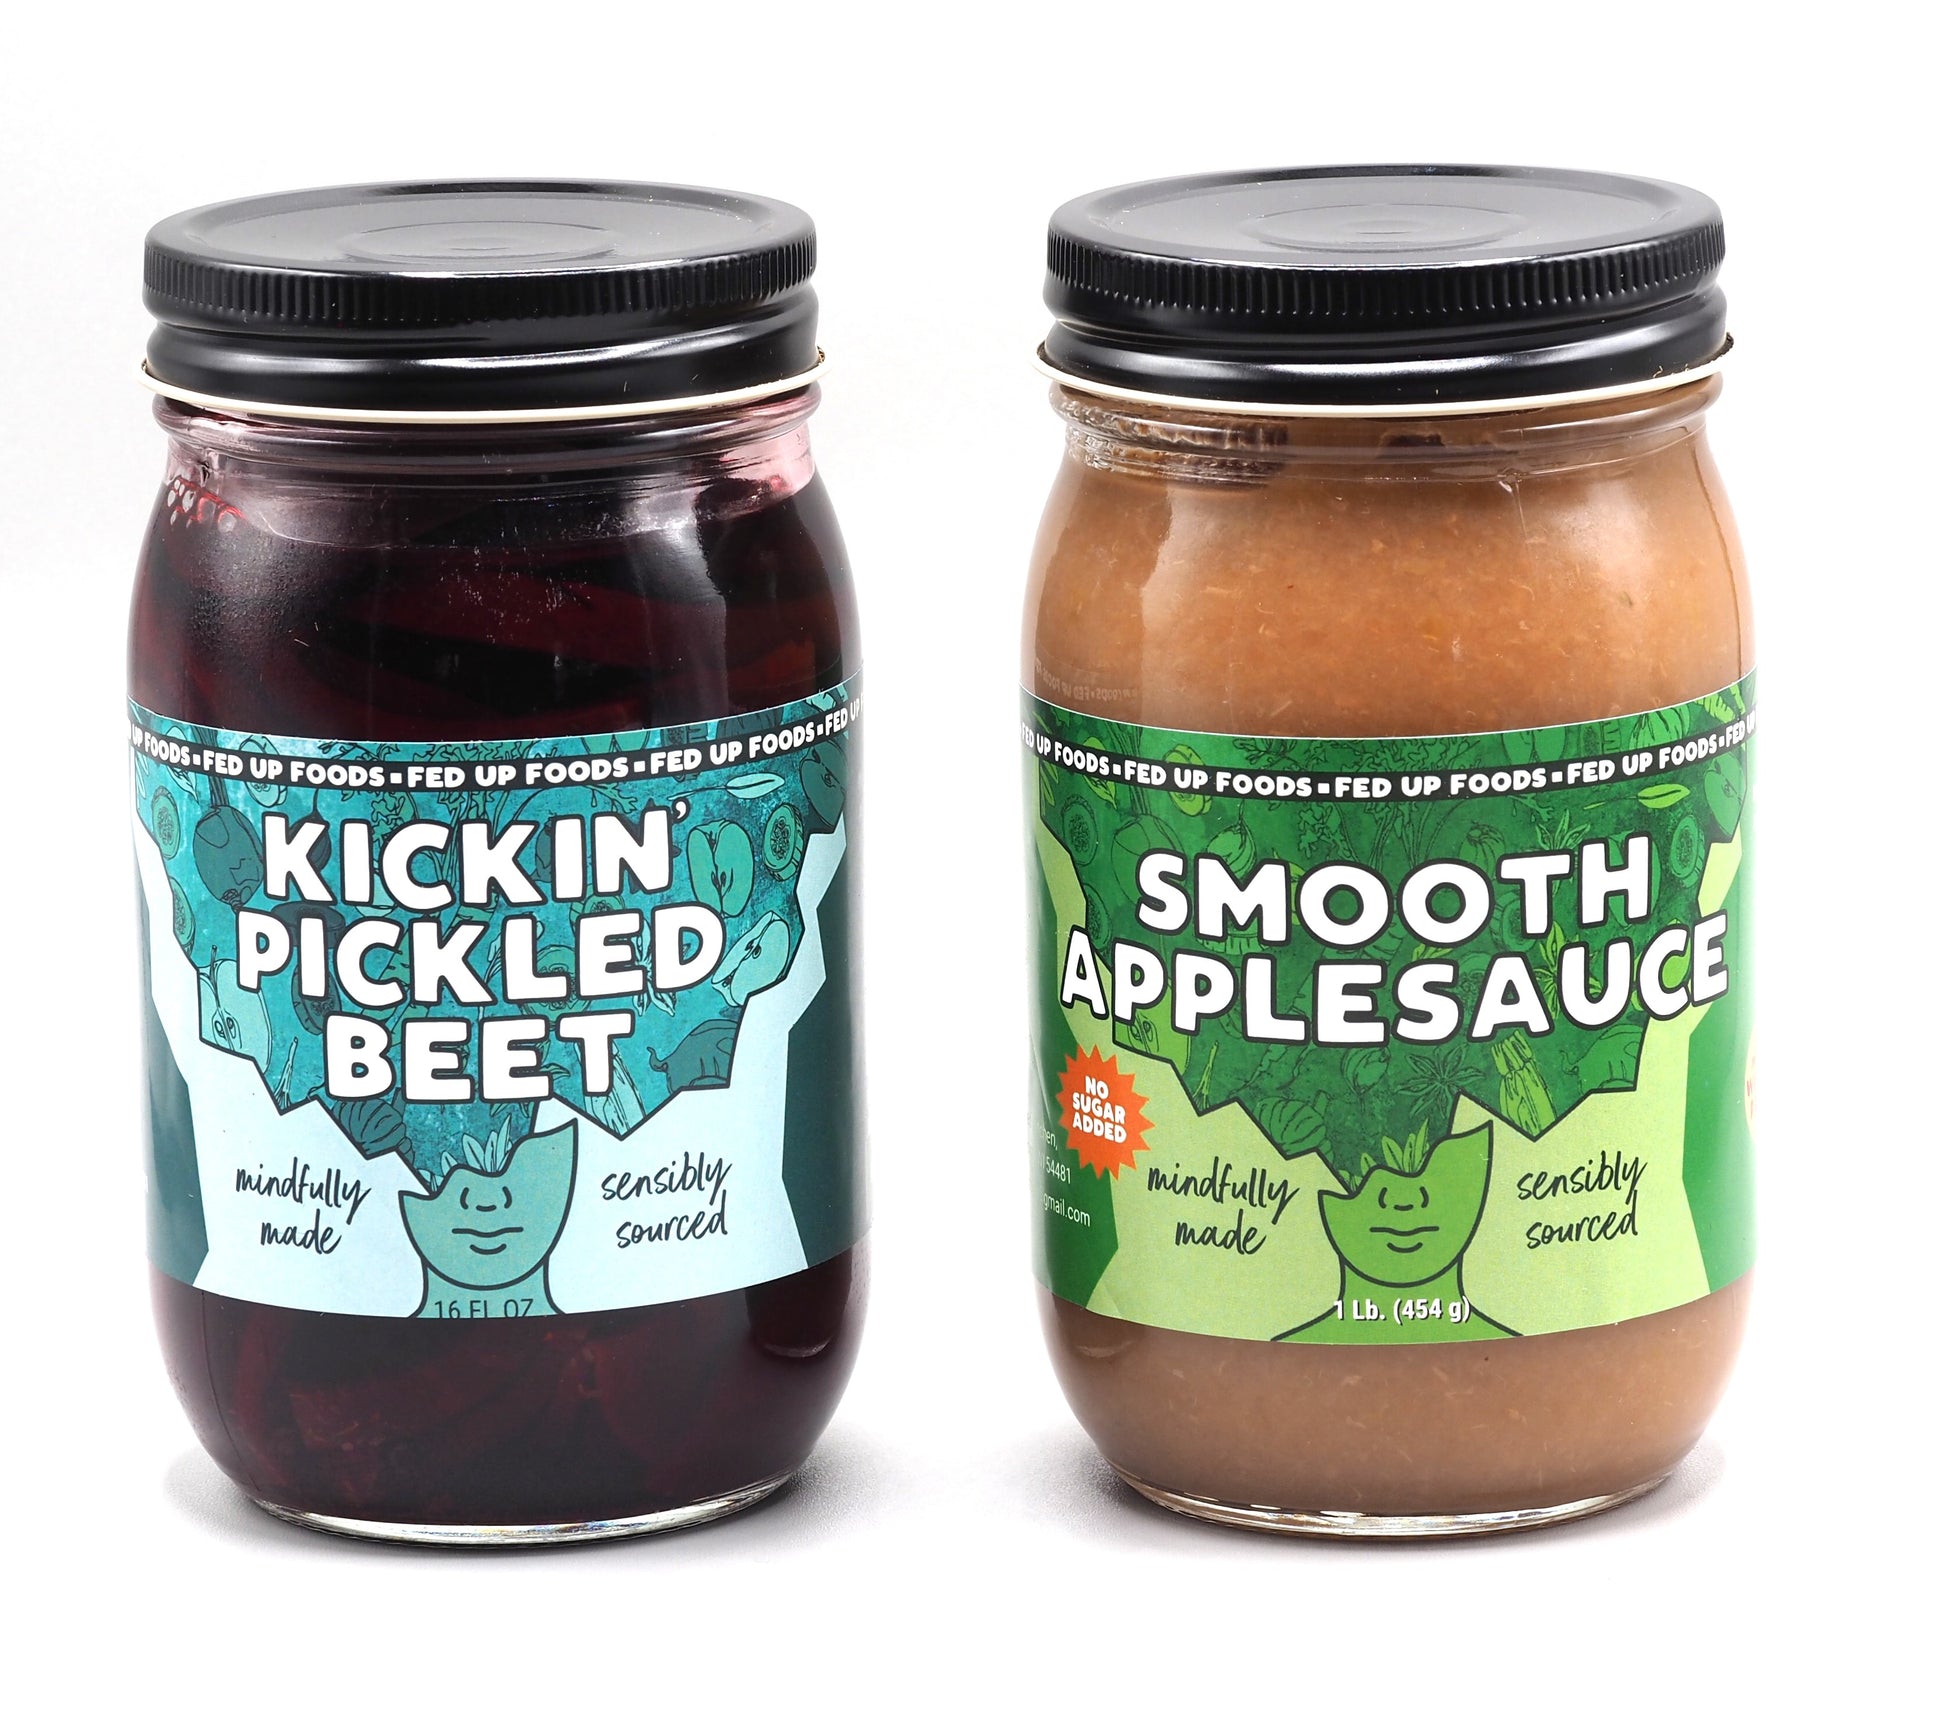 Fed Up Foods 2 pack variety pack with kickin' pickled beet and smooth applesauce